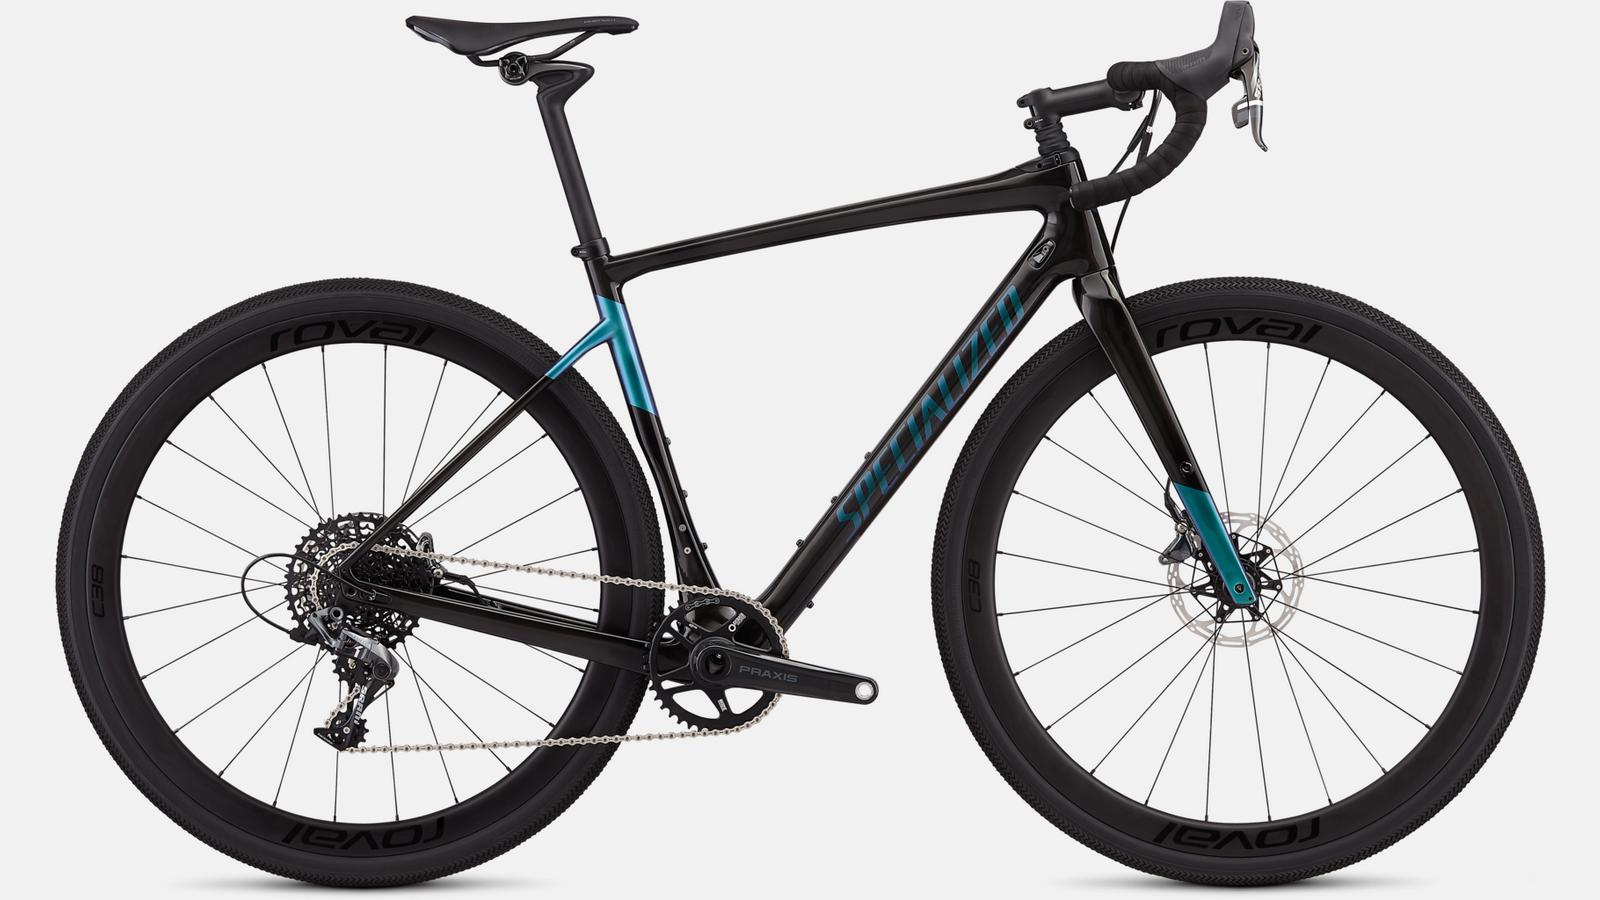 Paint for 2019 Specialized Men's Diverge Expert X1 - Gloss Carbon